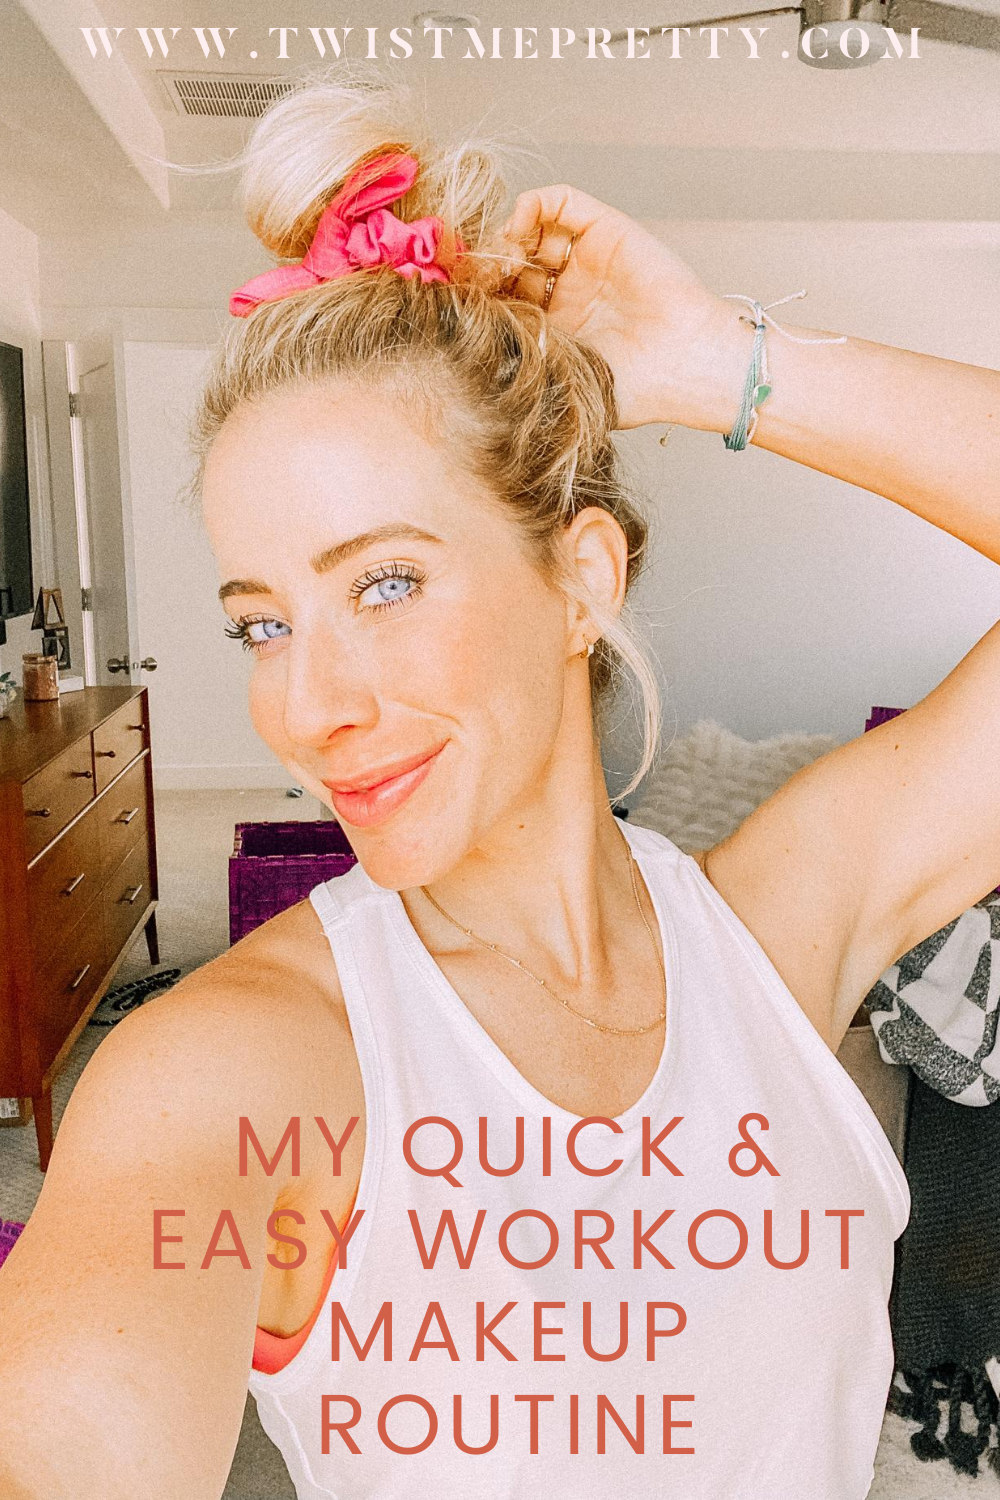 My quick and easy workout makeup routine! www.twistmepretty.com